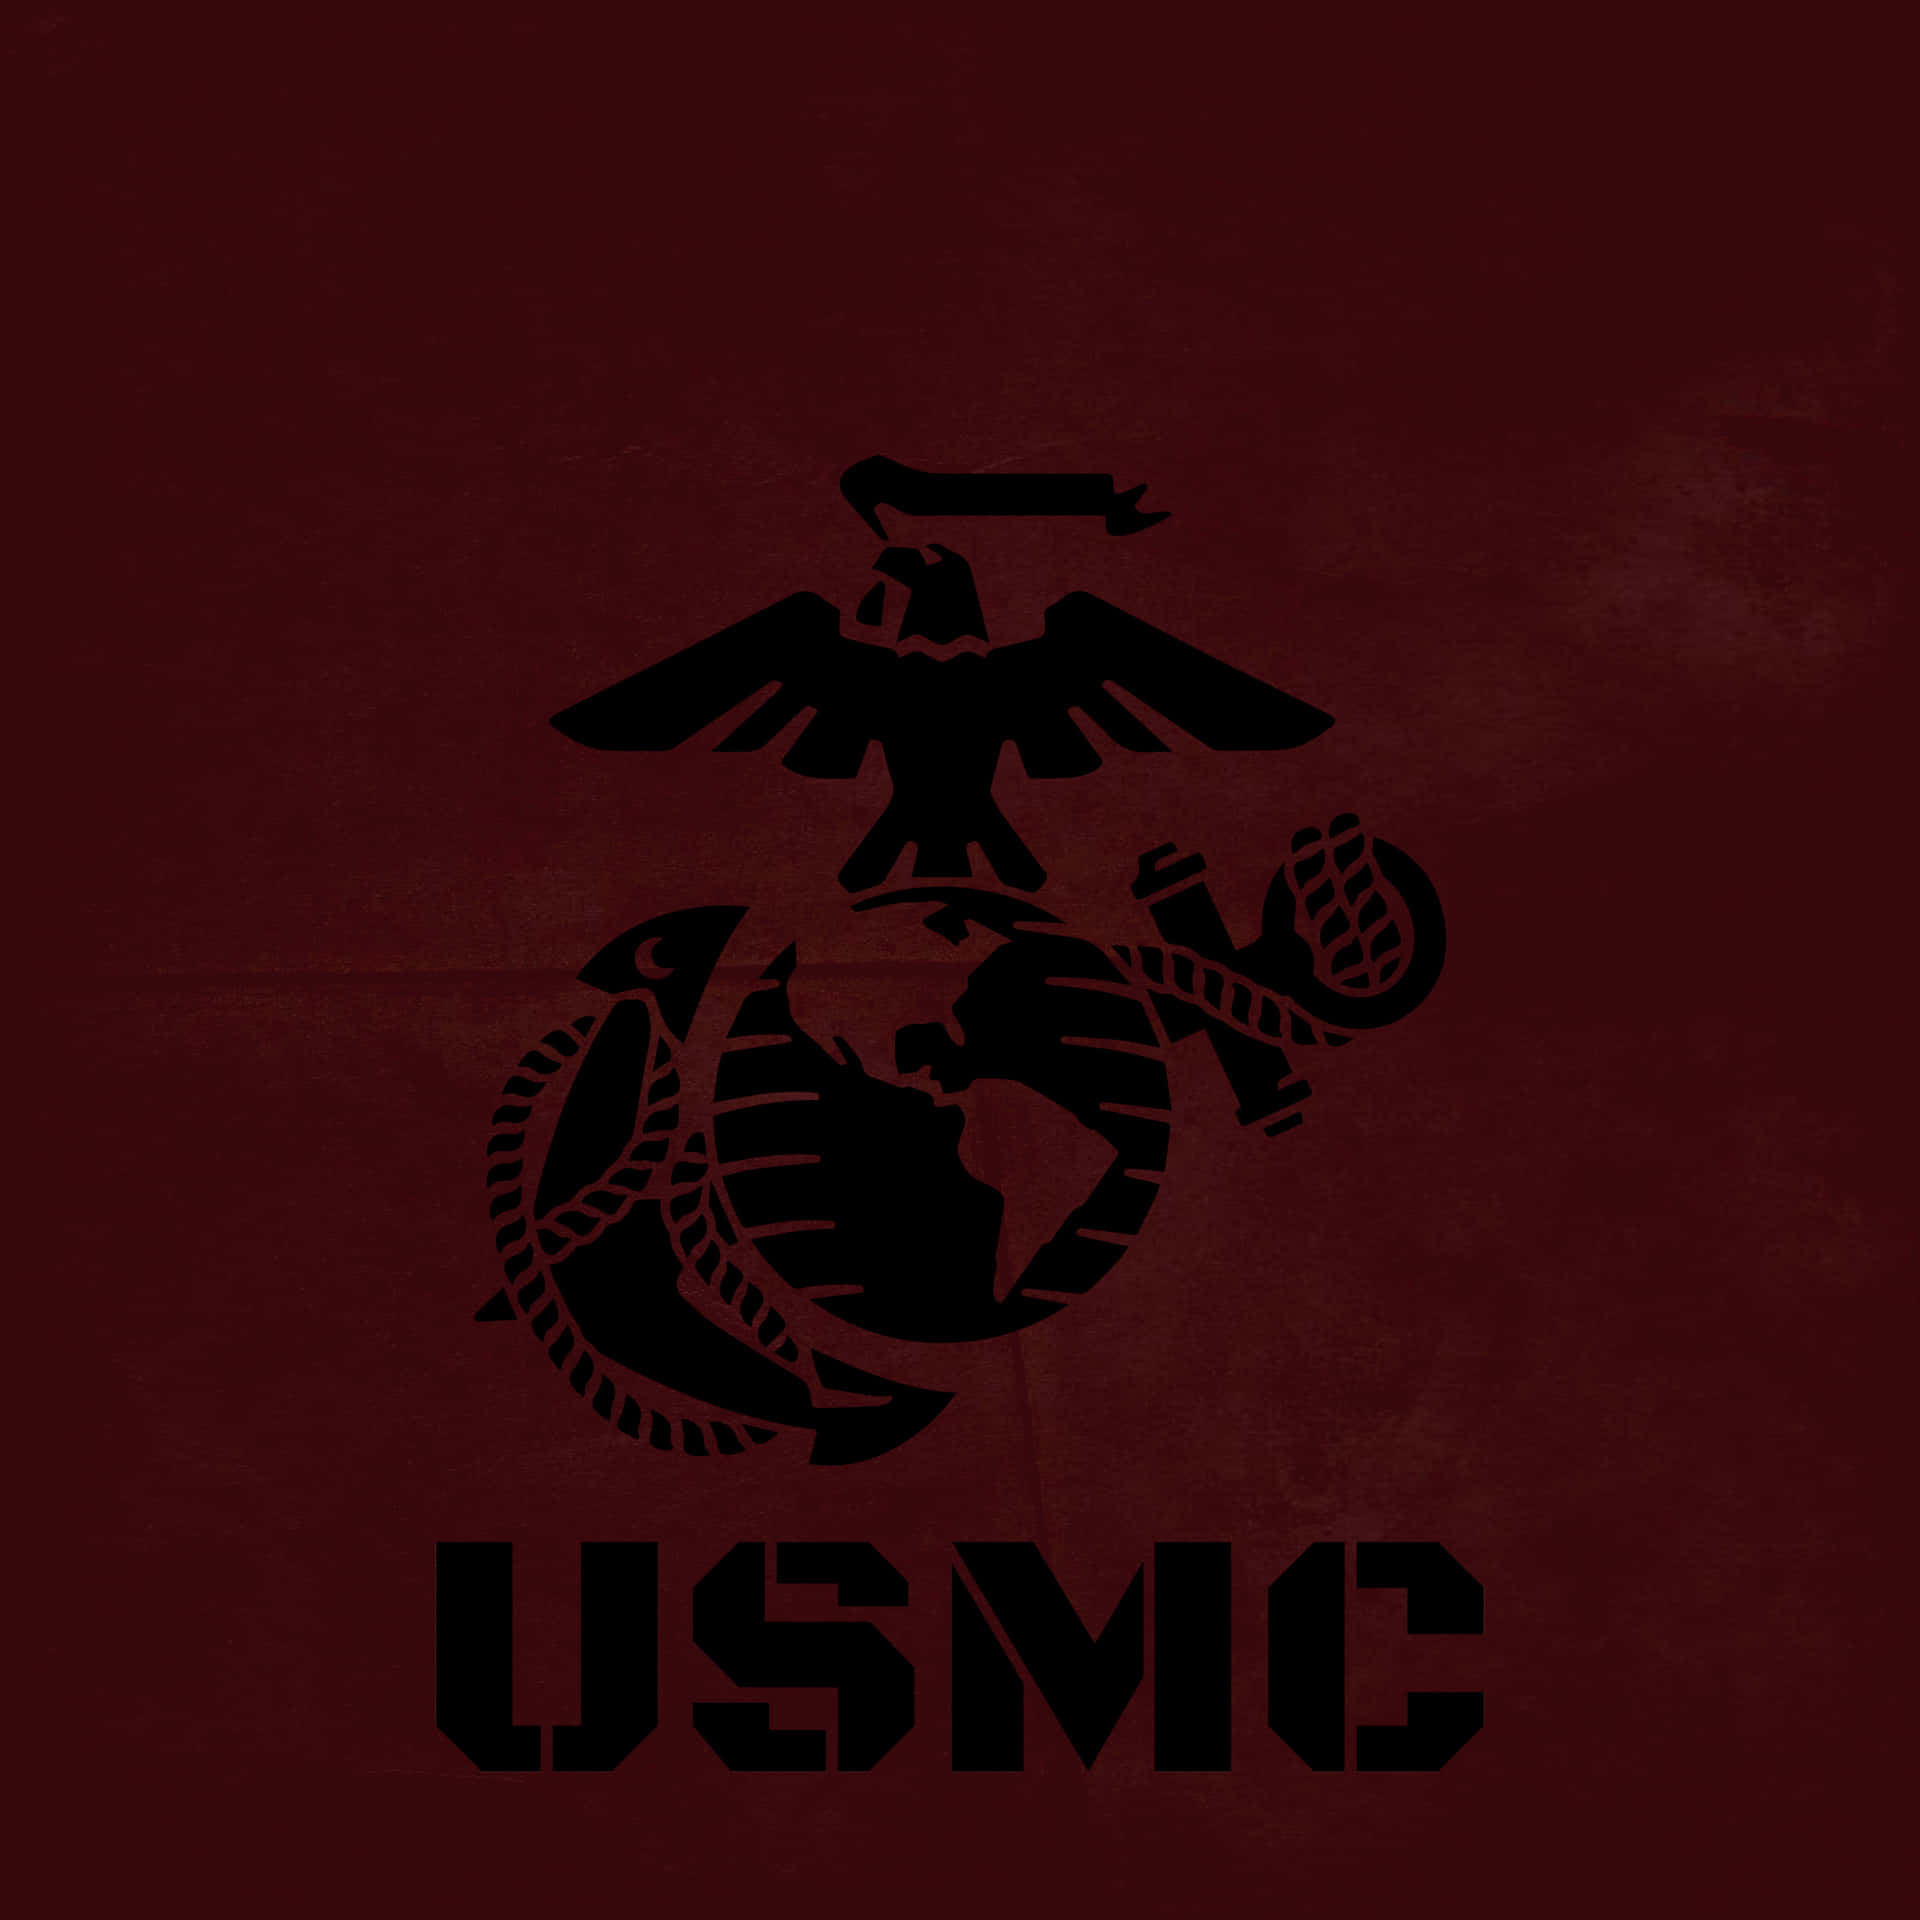 Forenede Staater Marines, Semper Fi! Wallpaper